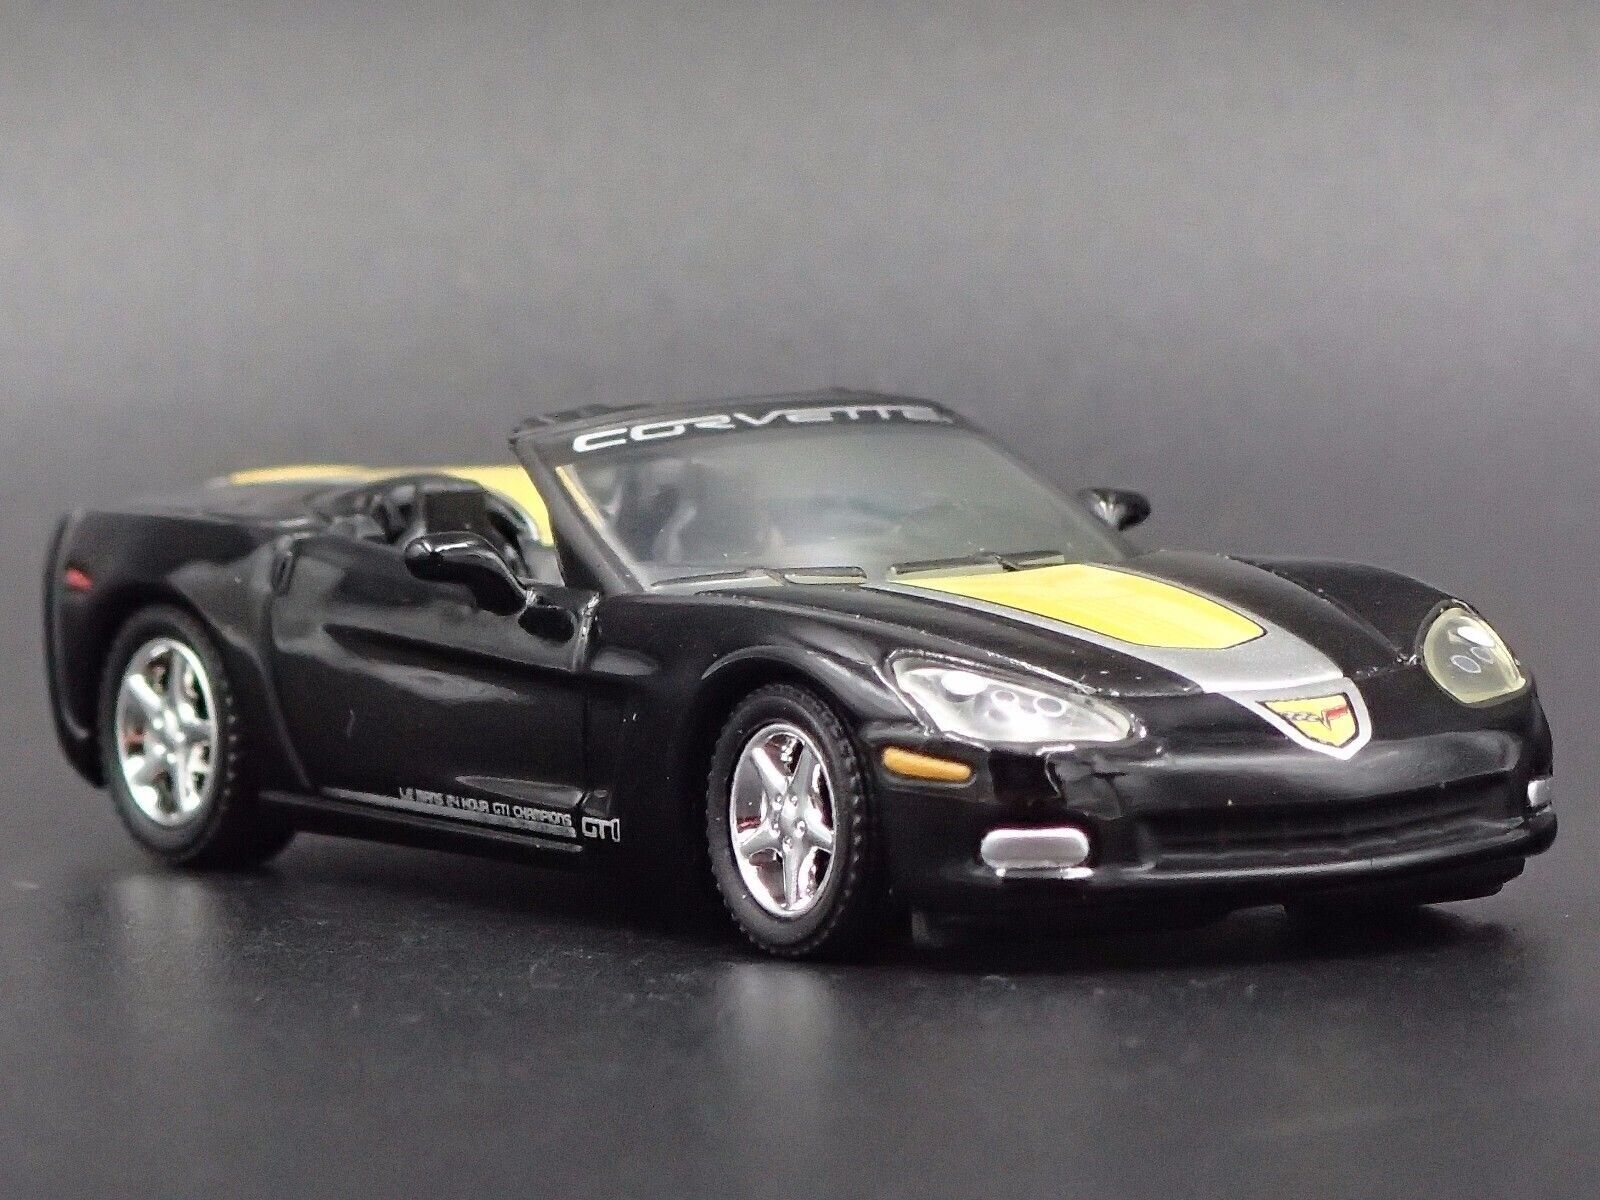 2005-2013 CHEVY CHEVROLET CORVETTE CONVERTIBLE GT1 1:64 SCALE DIECAST relisted